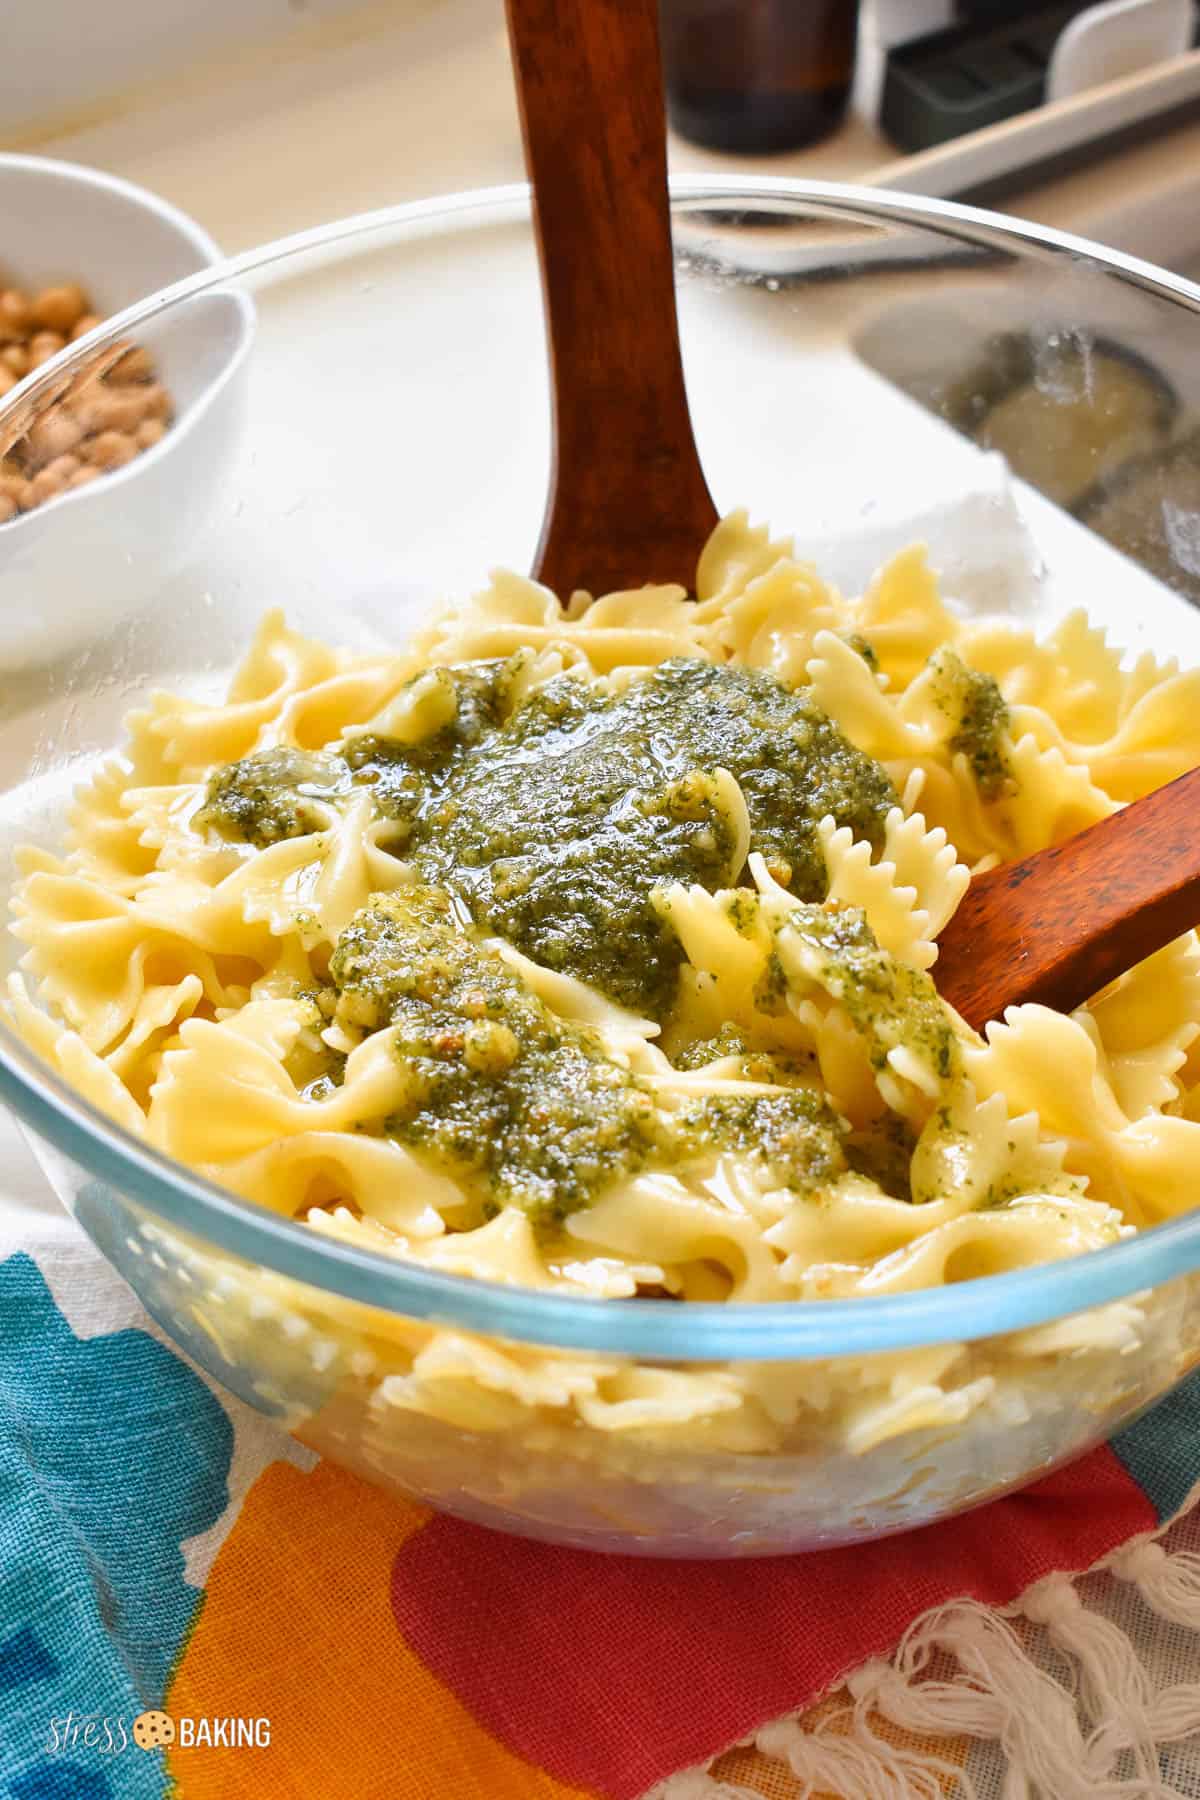 Farfalle pasta and pesto in a clear bowl